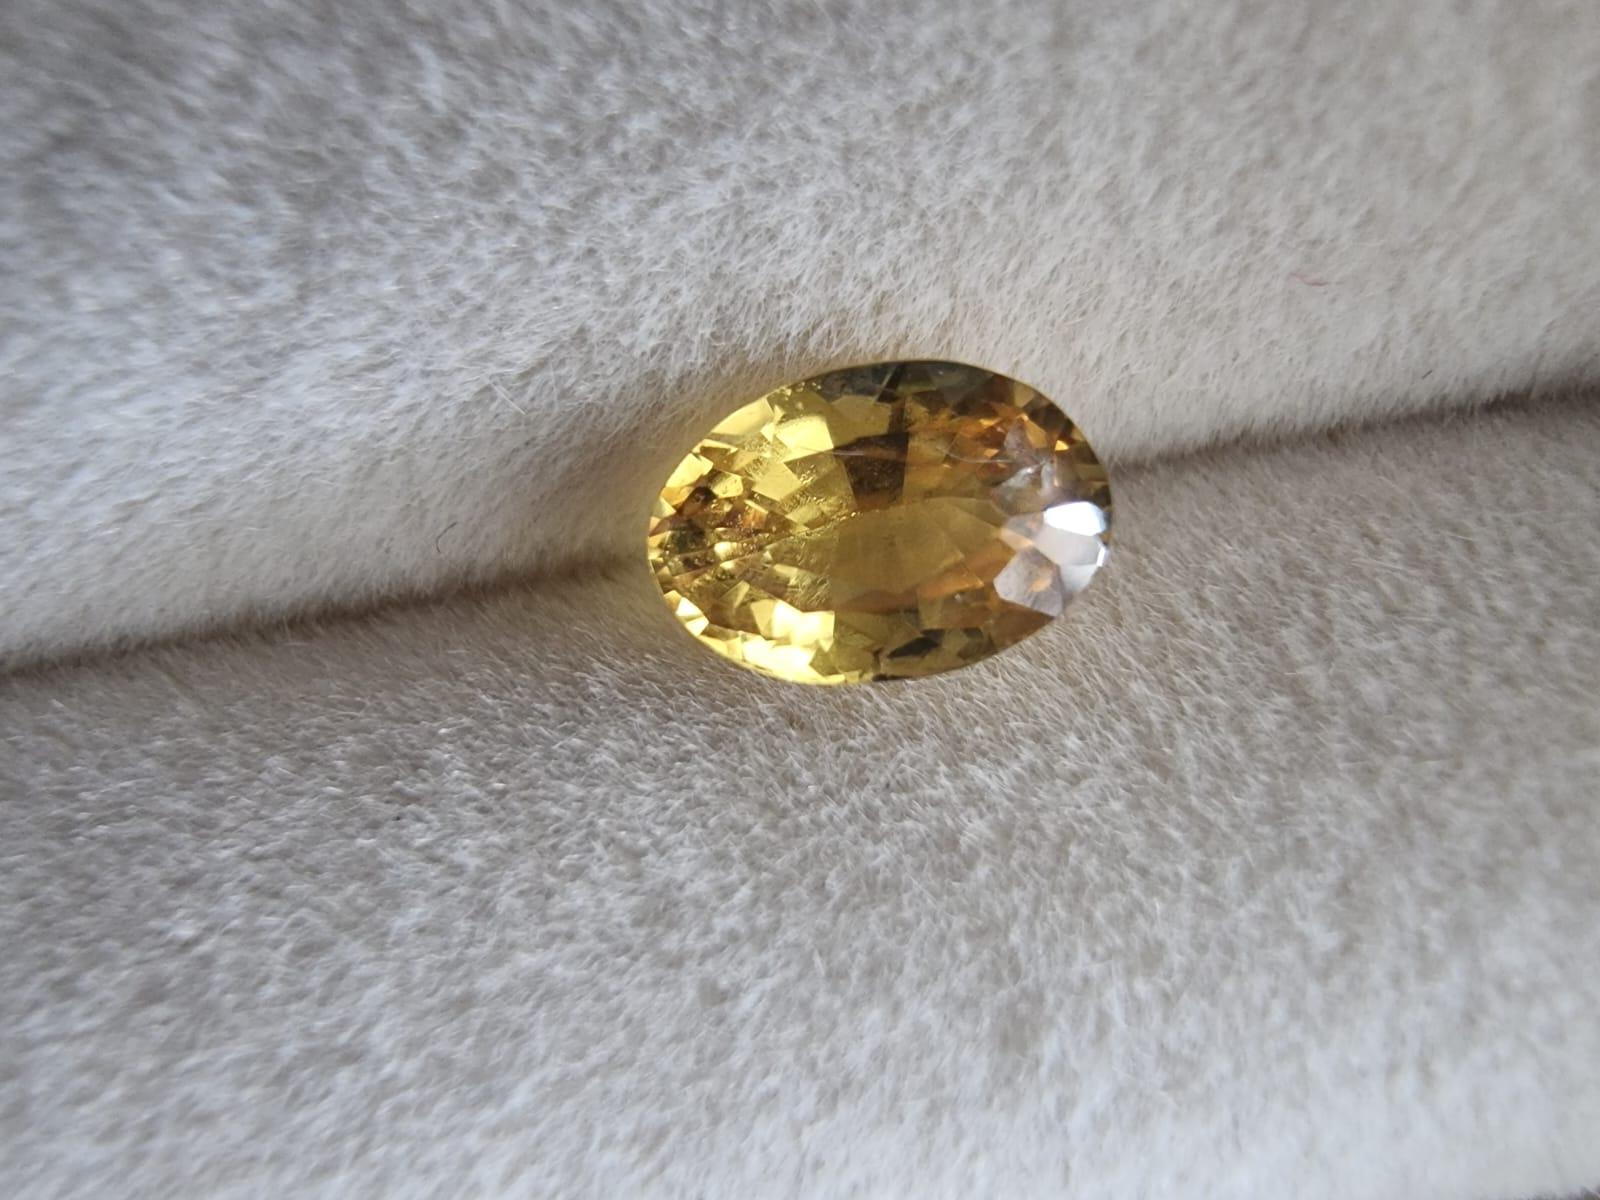 Brighten Your World with a Eye Clean 0.95ct Oval Cut Natural UNHEATED Yellow Sapphire Loose Gemstone. With its captivating yellow hue, this loose gemstone is a true treasure of nature, waiting to be transformed into a unique and dazzling piece of